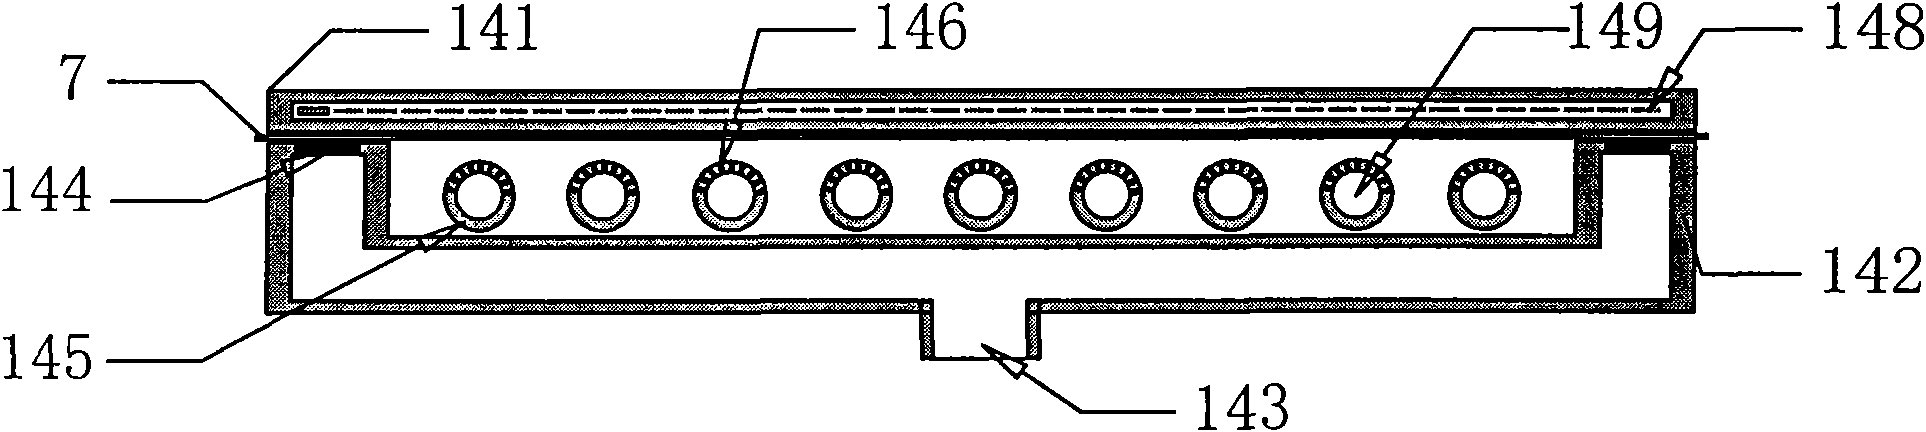 Roll-to-roll plasma device for enhancing chemical vapor deposition